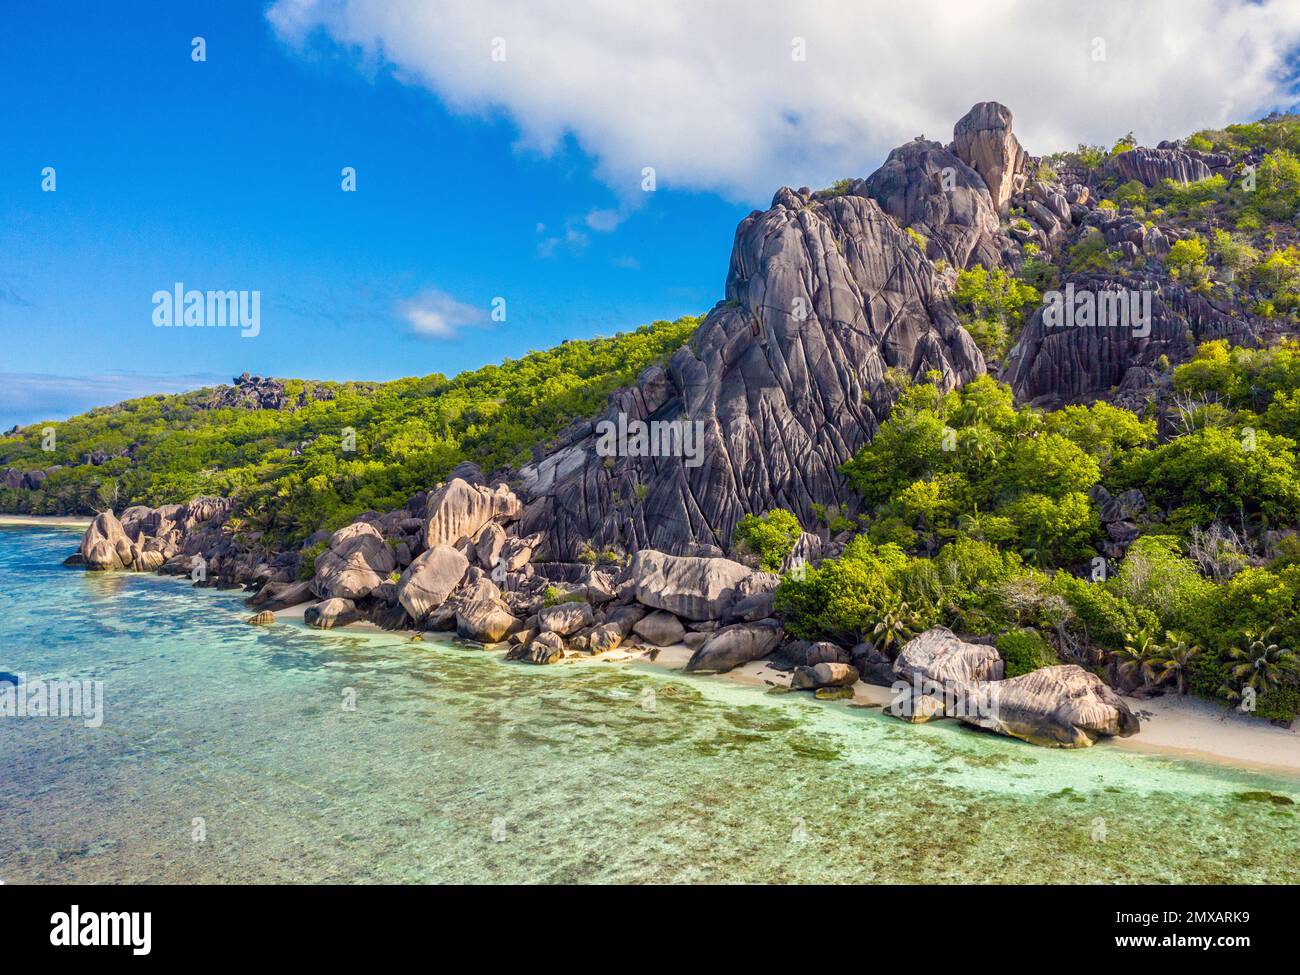 Aerial view of Anse Source d'Argent beach in La Digue, Seychelles Stock Photo